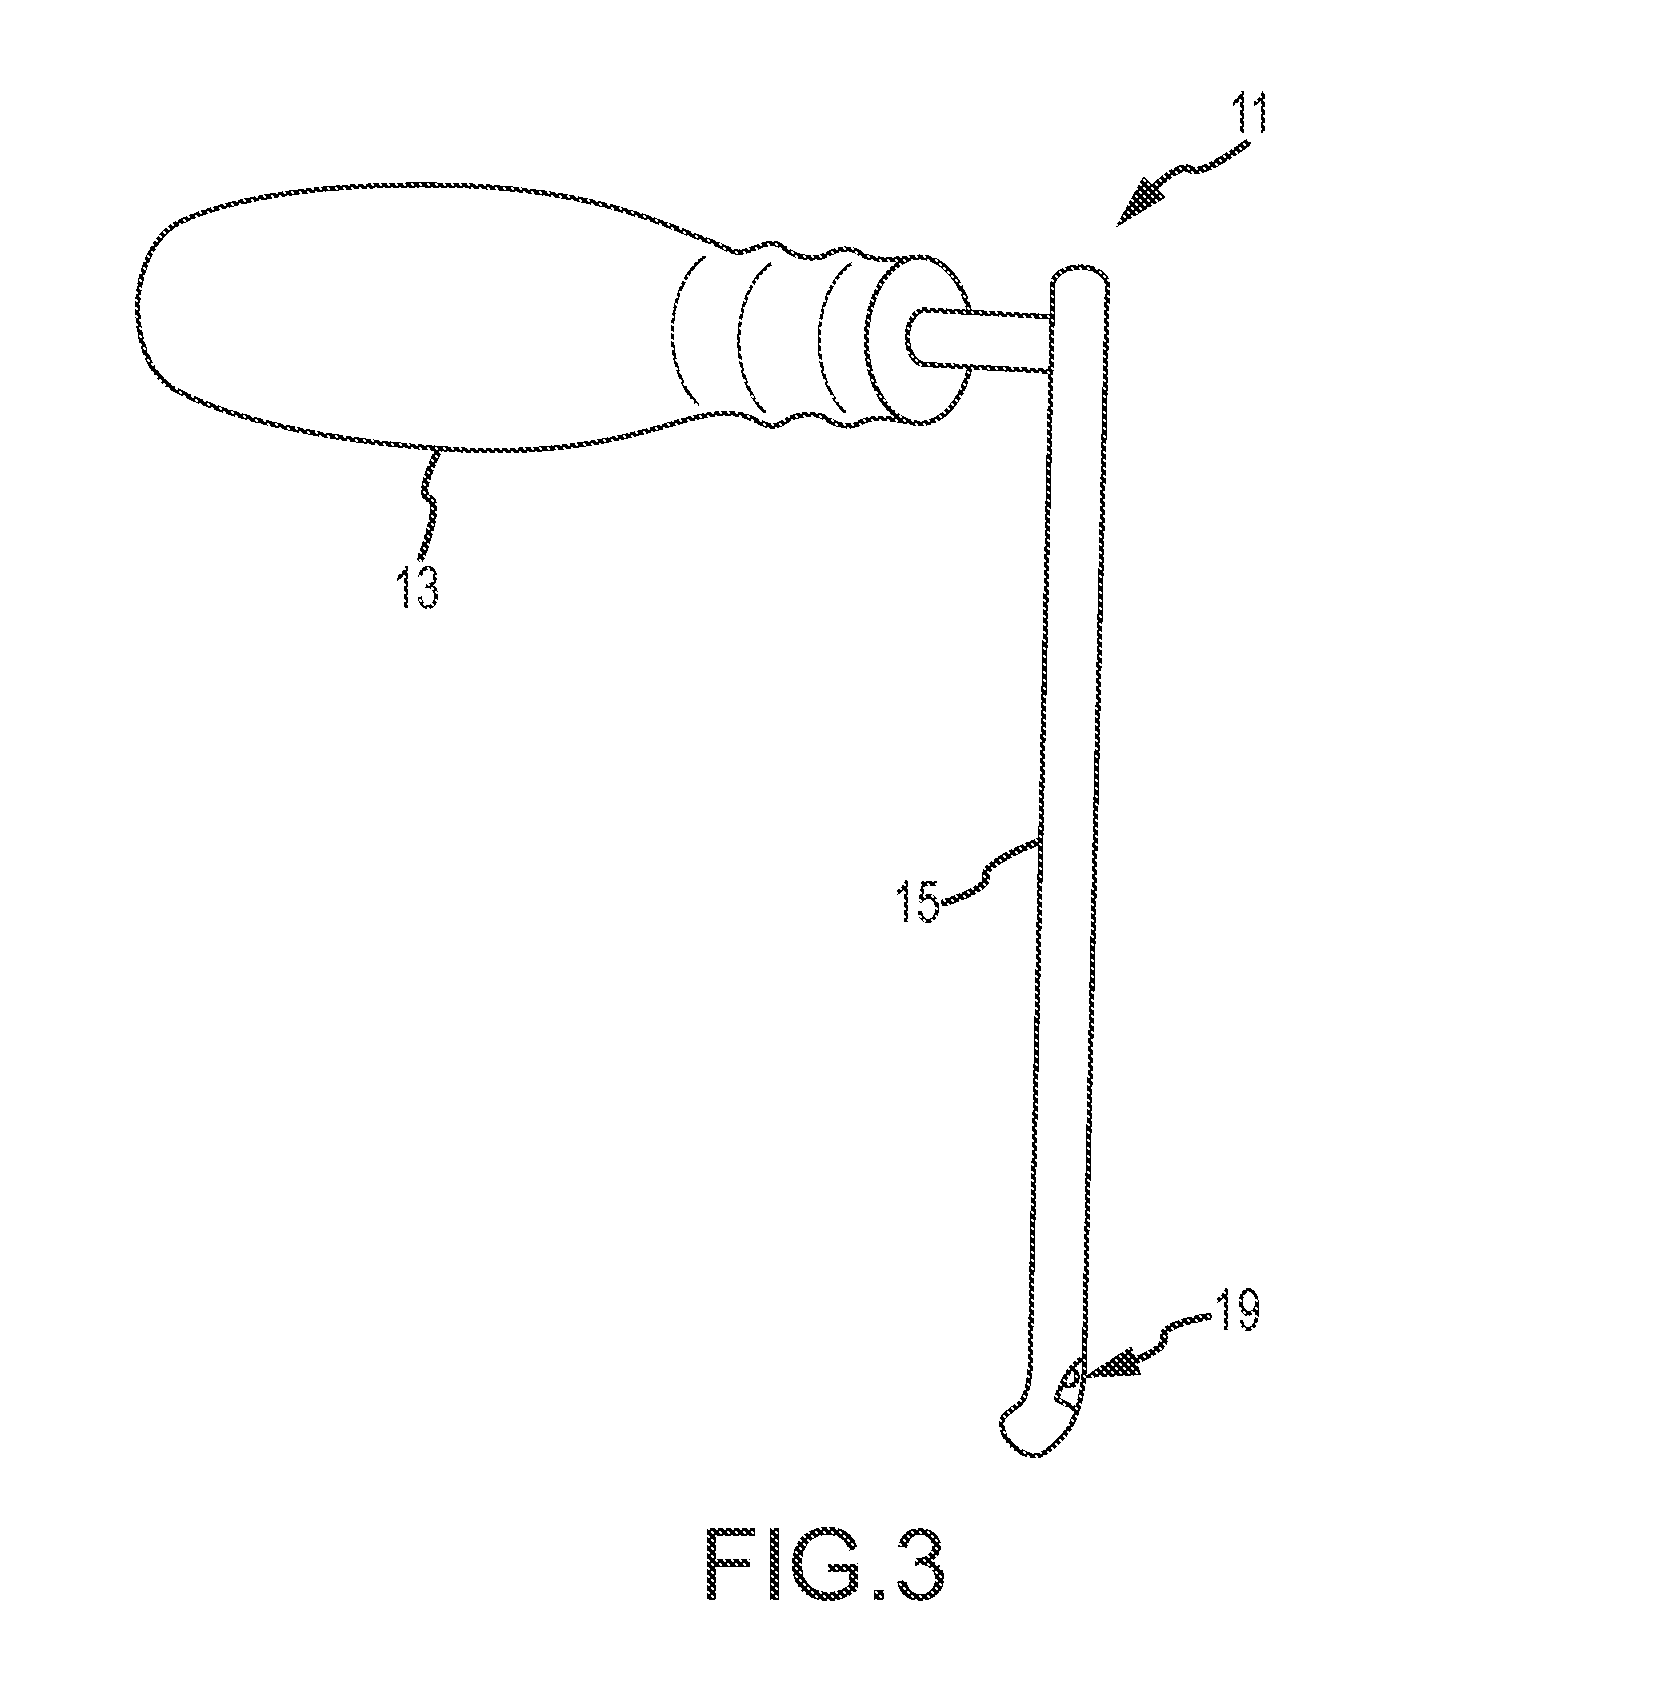 Method and Apparatus for Performing Retro Peritoneal Dissection